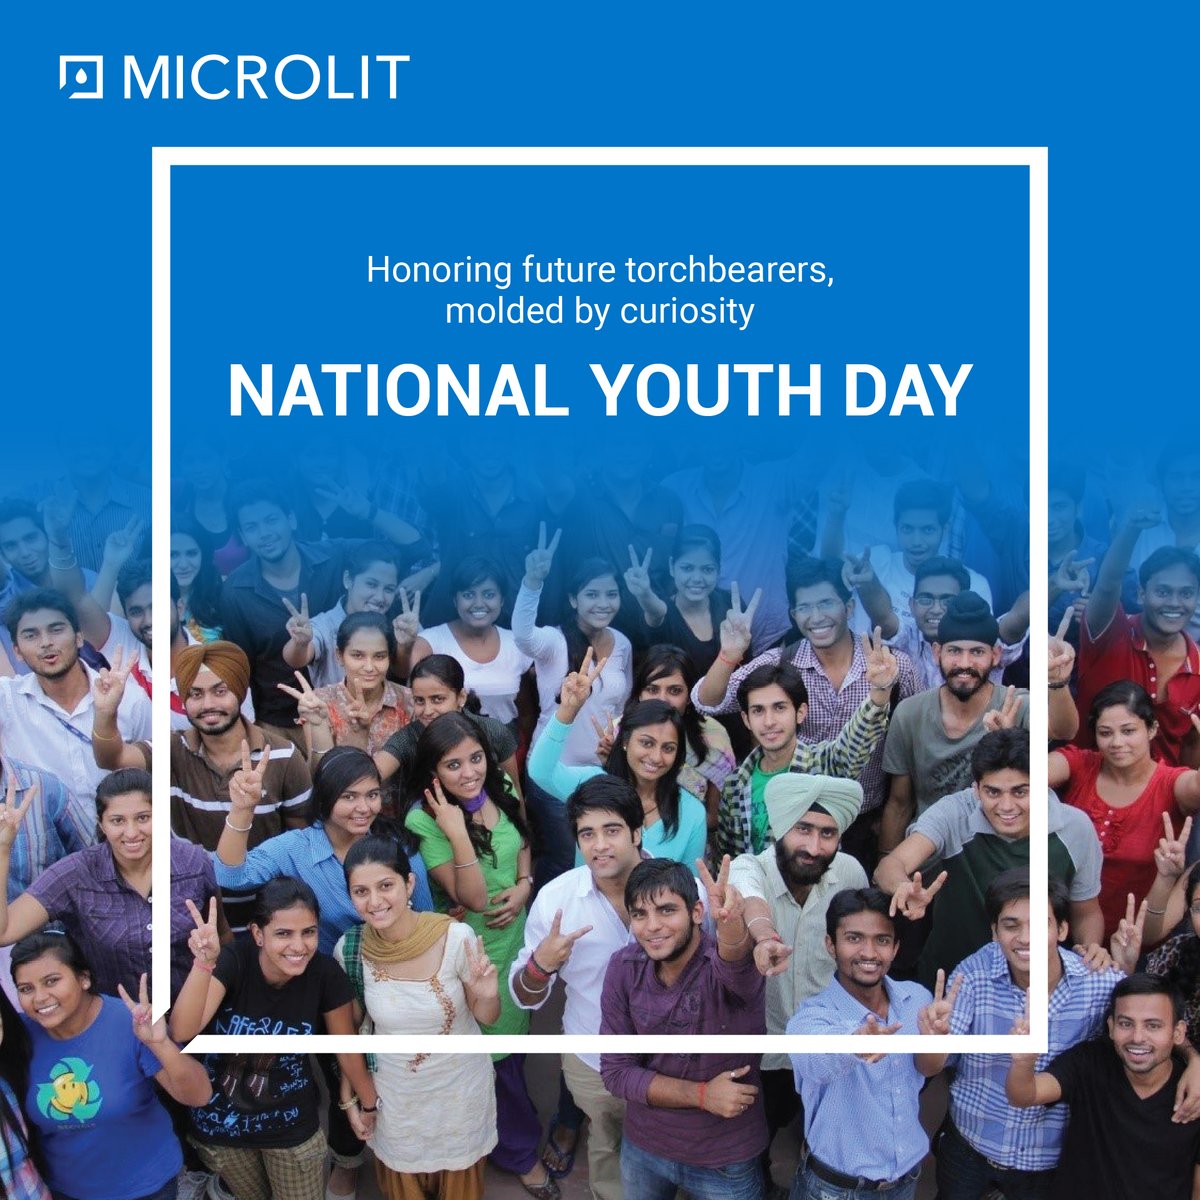 Applauding the architects of tomorrow, inspired by the inquiring minds of youth.✨

Let's inspire, innovate and lead with passion.🌟

#NationalYouthDay #YouthEmpowerment #LeadershipJourney #Microlit #EnablingInnovations #AccuracyMatters #ExperiencePrecision